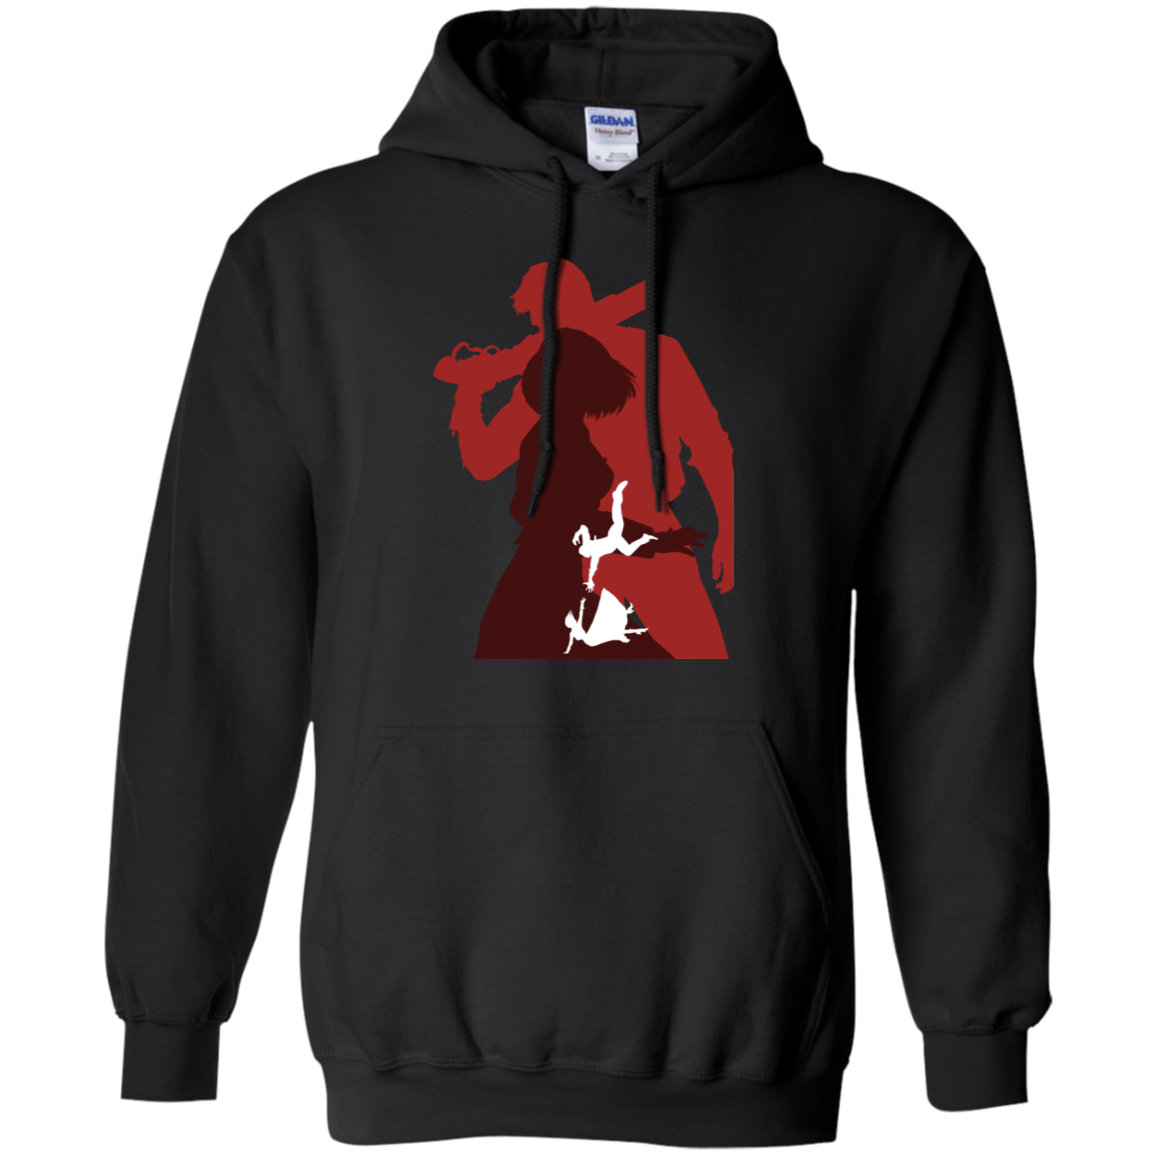 Bring Us The Girl Pullover Hoodie 8 oz.